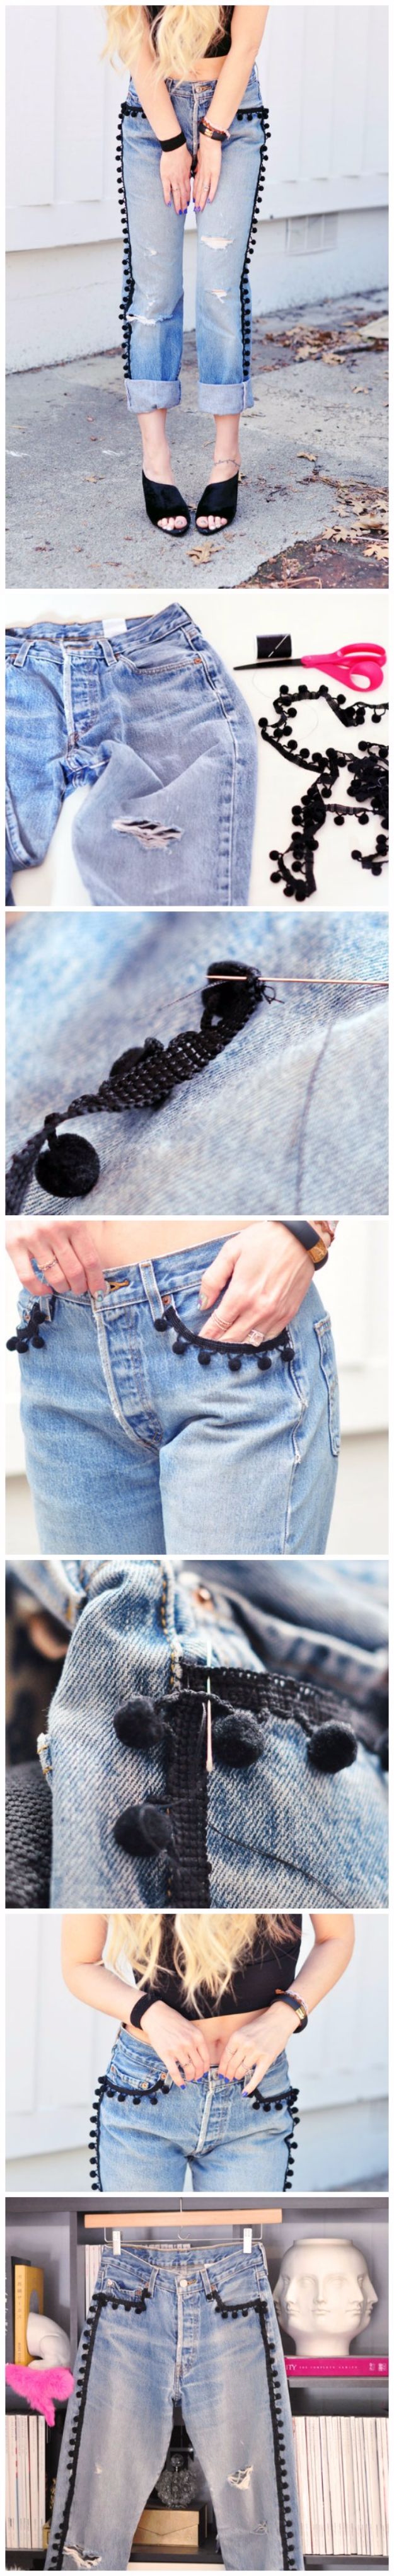 DIY Jeans Makeovers - DIY Pom Pom Jeans - Easy Crafts and Tutorials to Refashion and Upcycle Your Jeans and Create Ripped, Distressed, Bleach, Lace Edge, Cut Off, Skinny, Shorts, Skirts, Galaxy and Painted Jeans Ideas - Cool Denim Fashions for Teens, Teenagers, Women #diyideas #diyclothes #clothinghacks #teencrafts